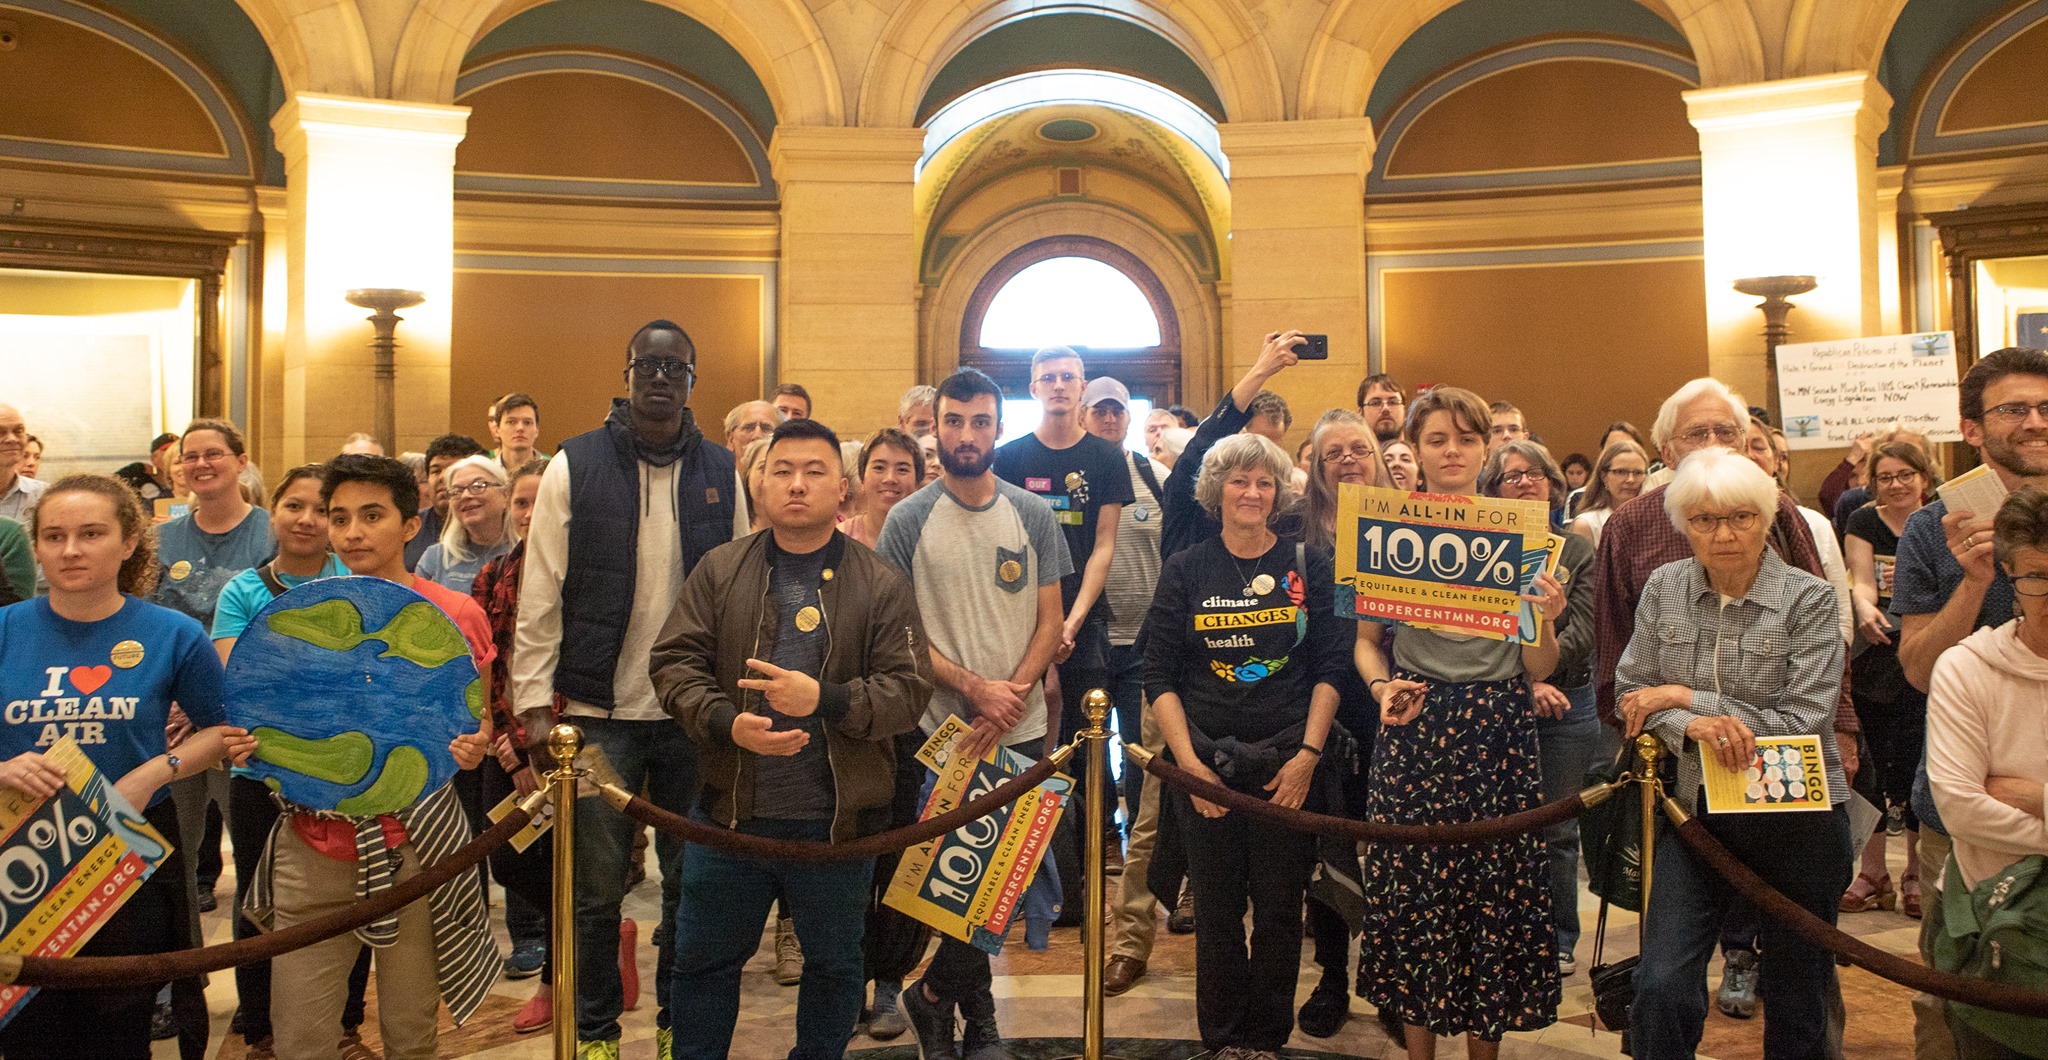 A group of people rallying for climate action at the Minnesota State capitol.